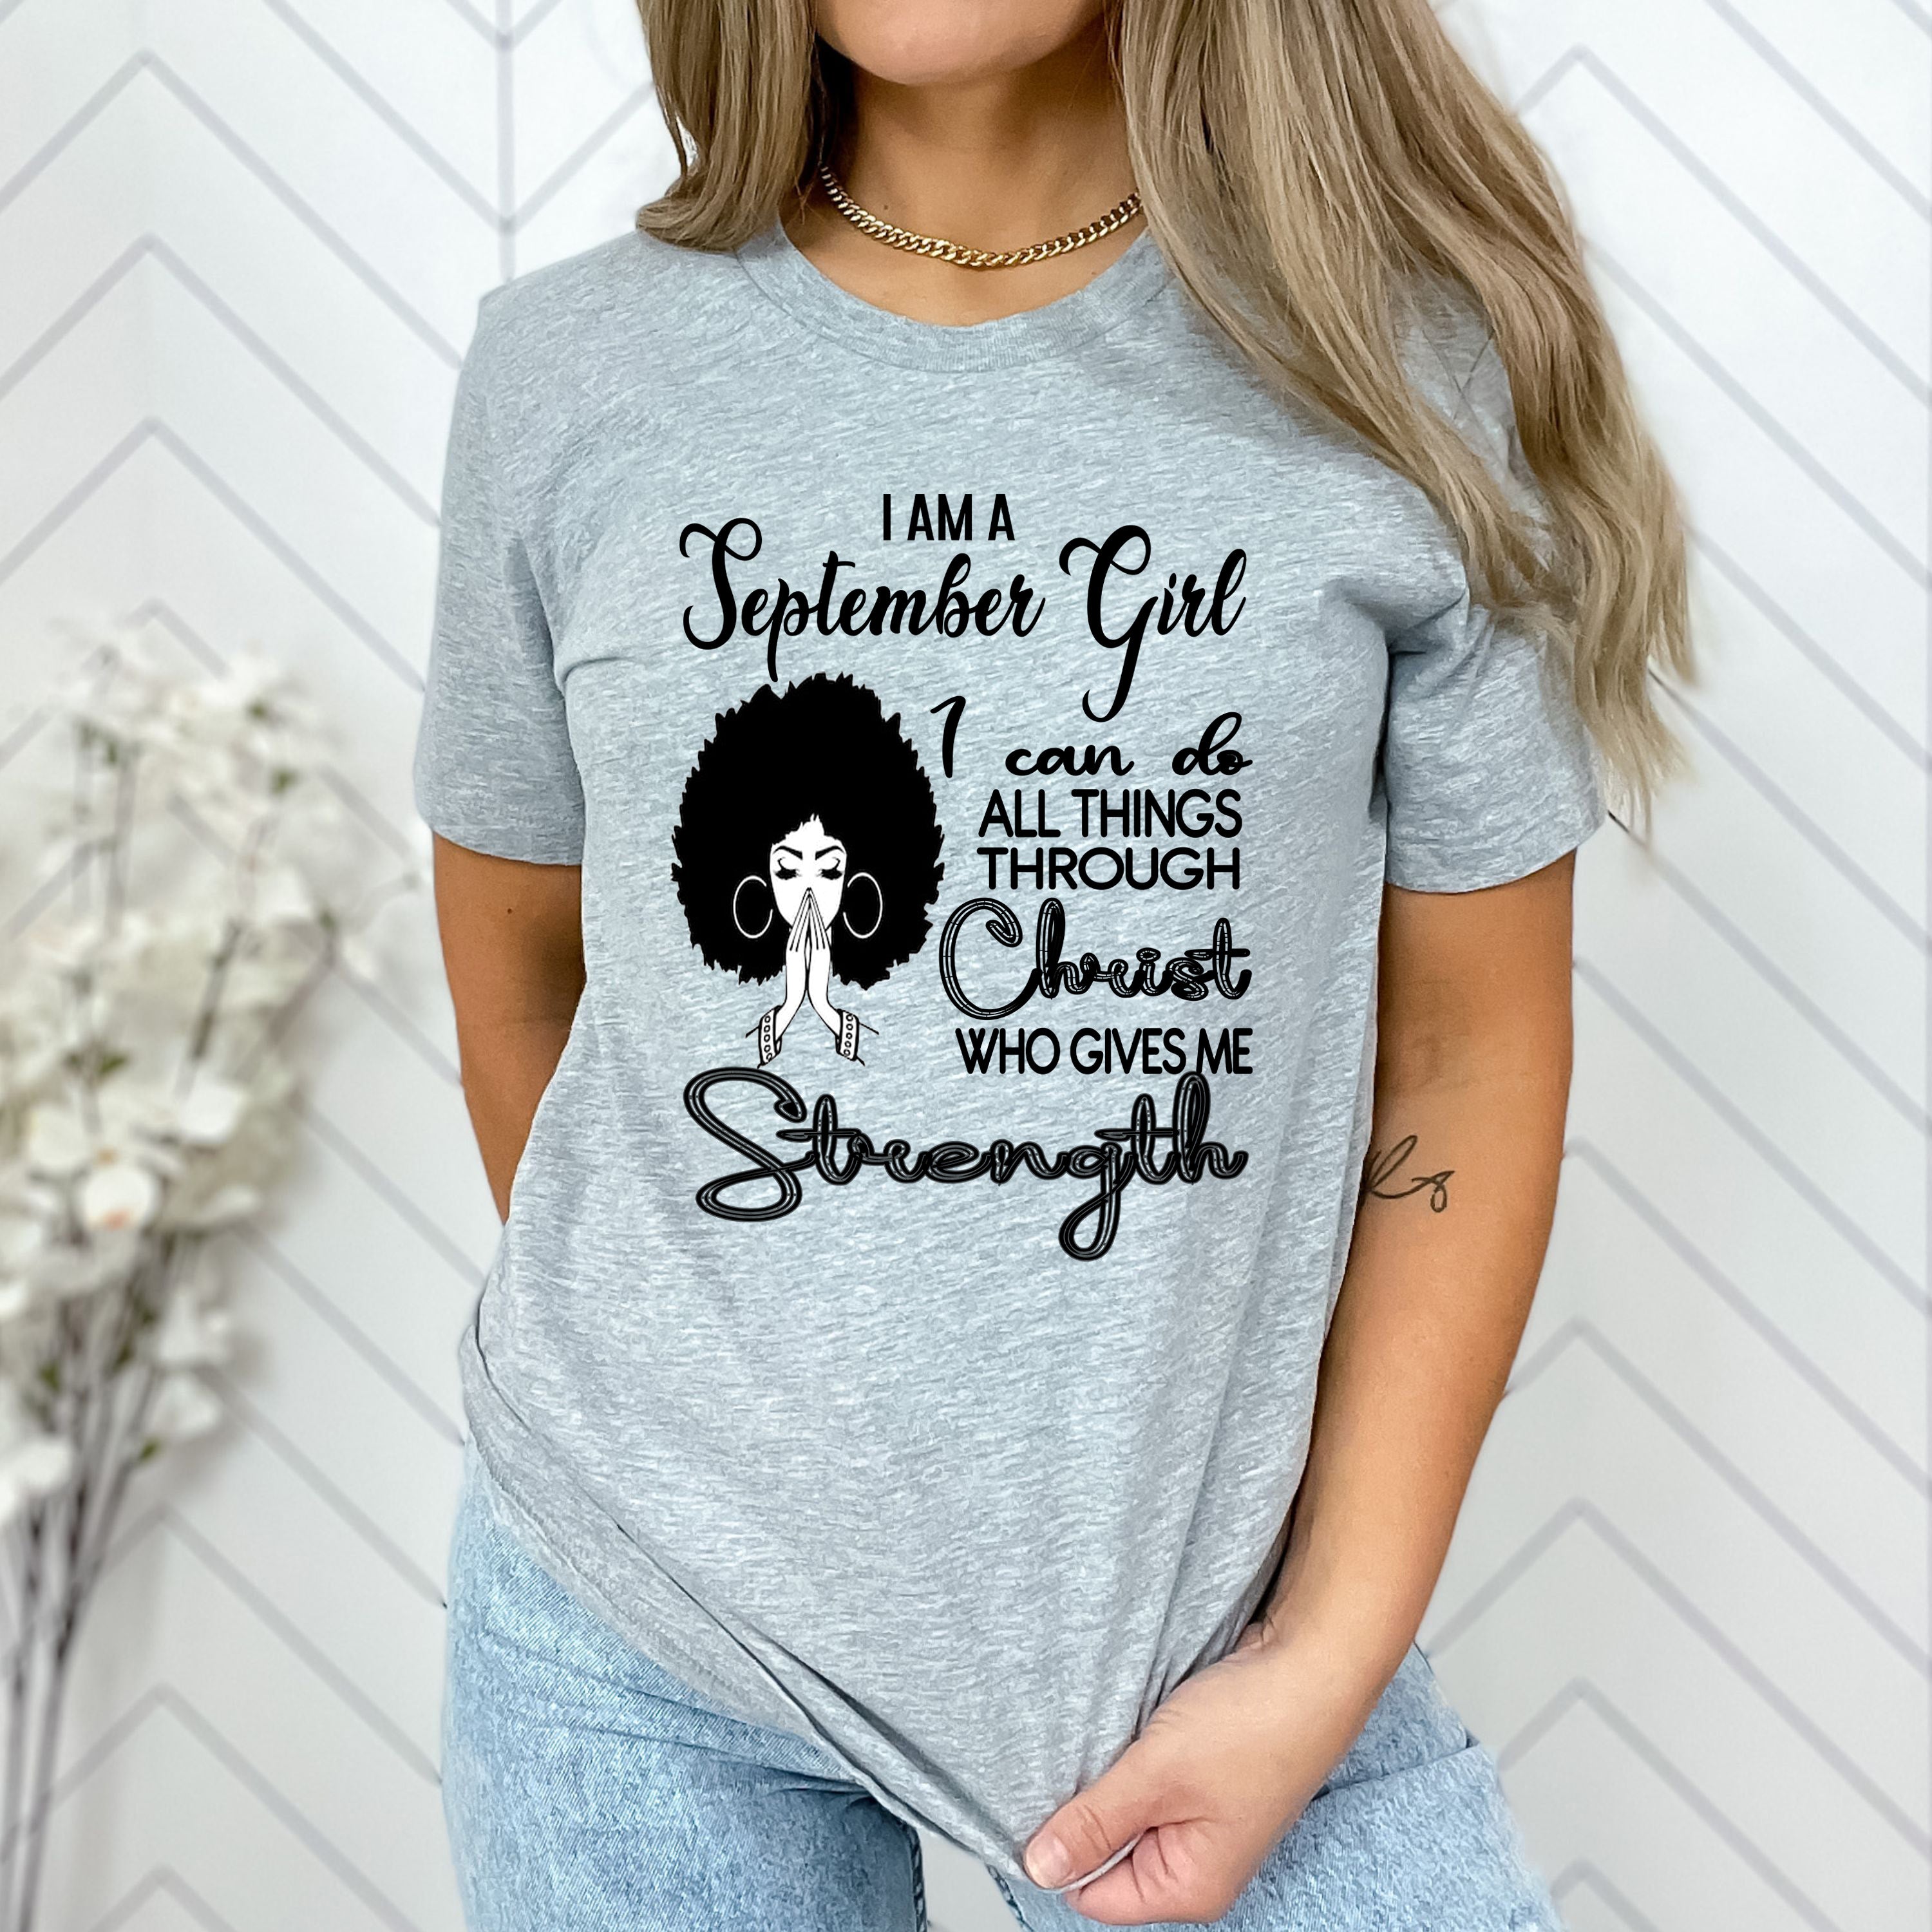 "SEPTEMBER GIRL Can Do All Things Through Christ Who Gives Me Strength",T-Shirt.